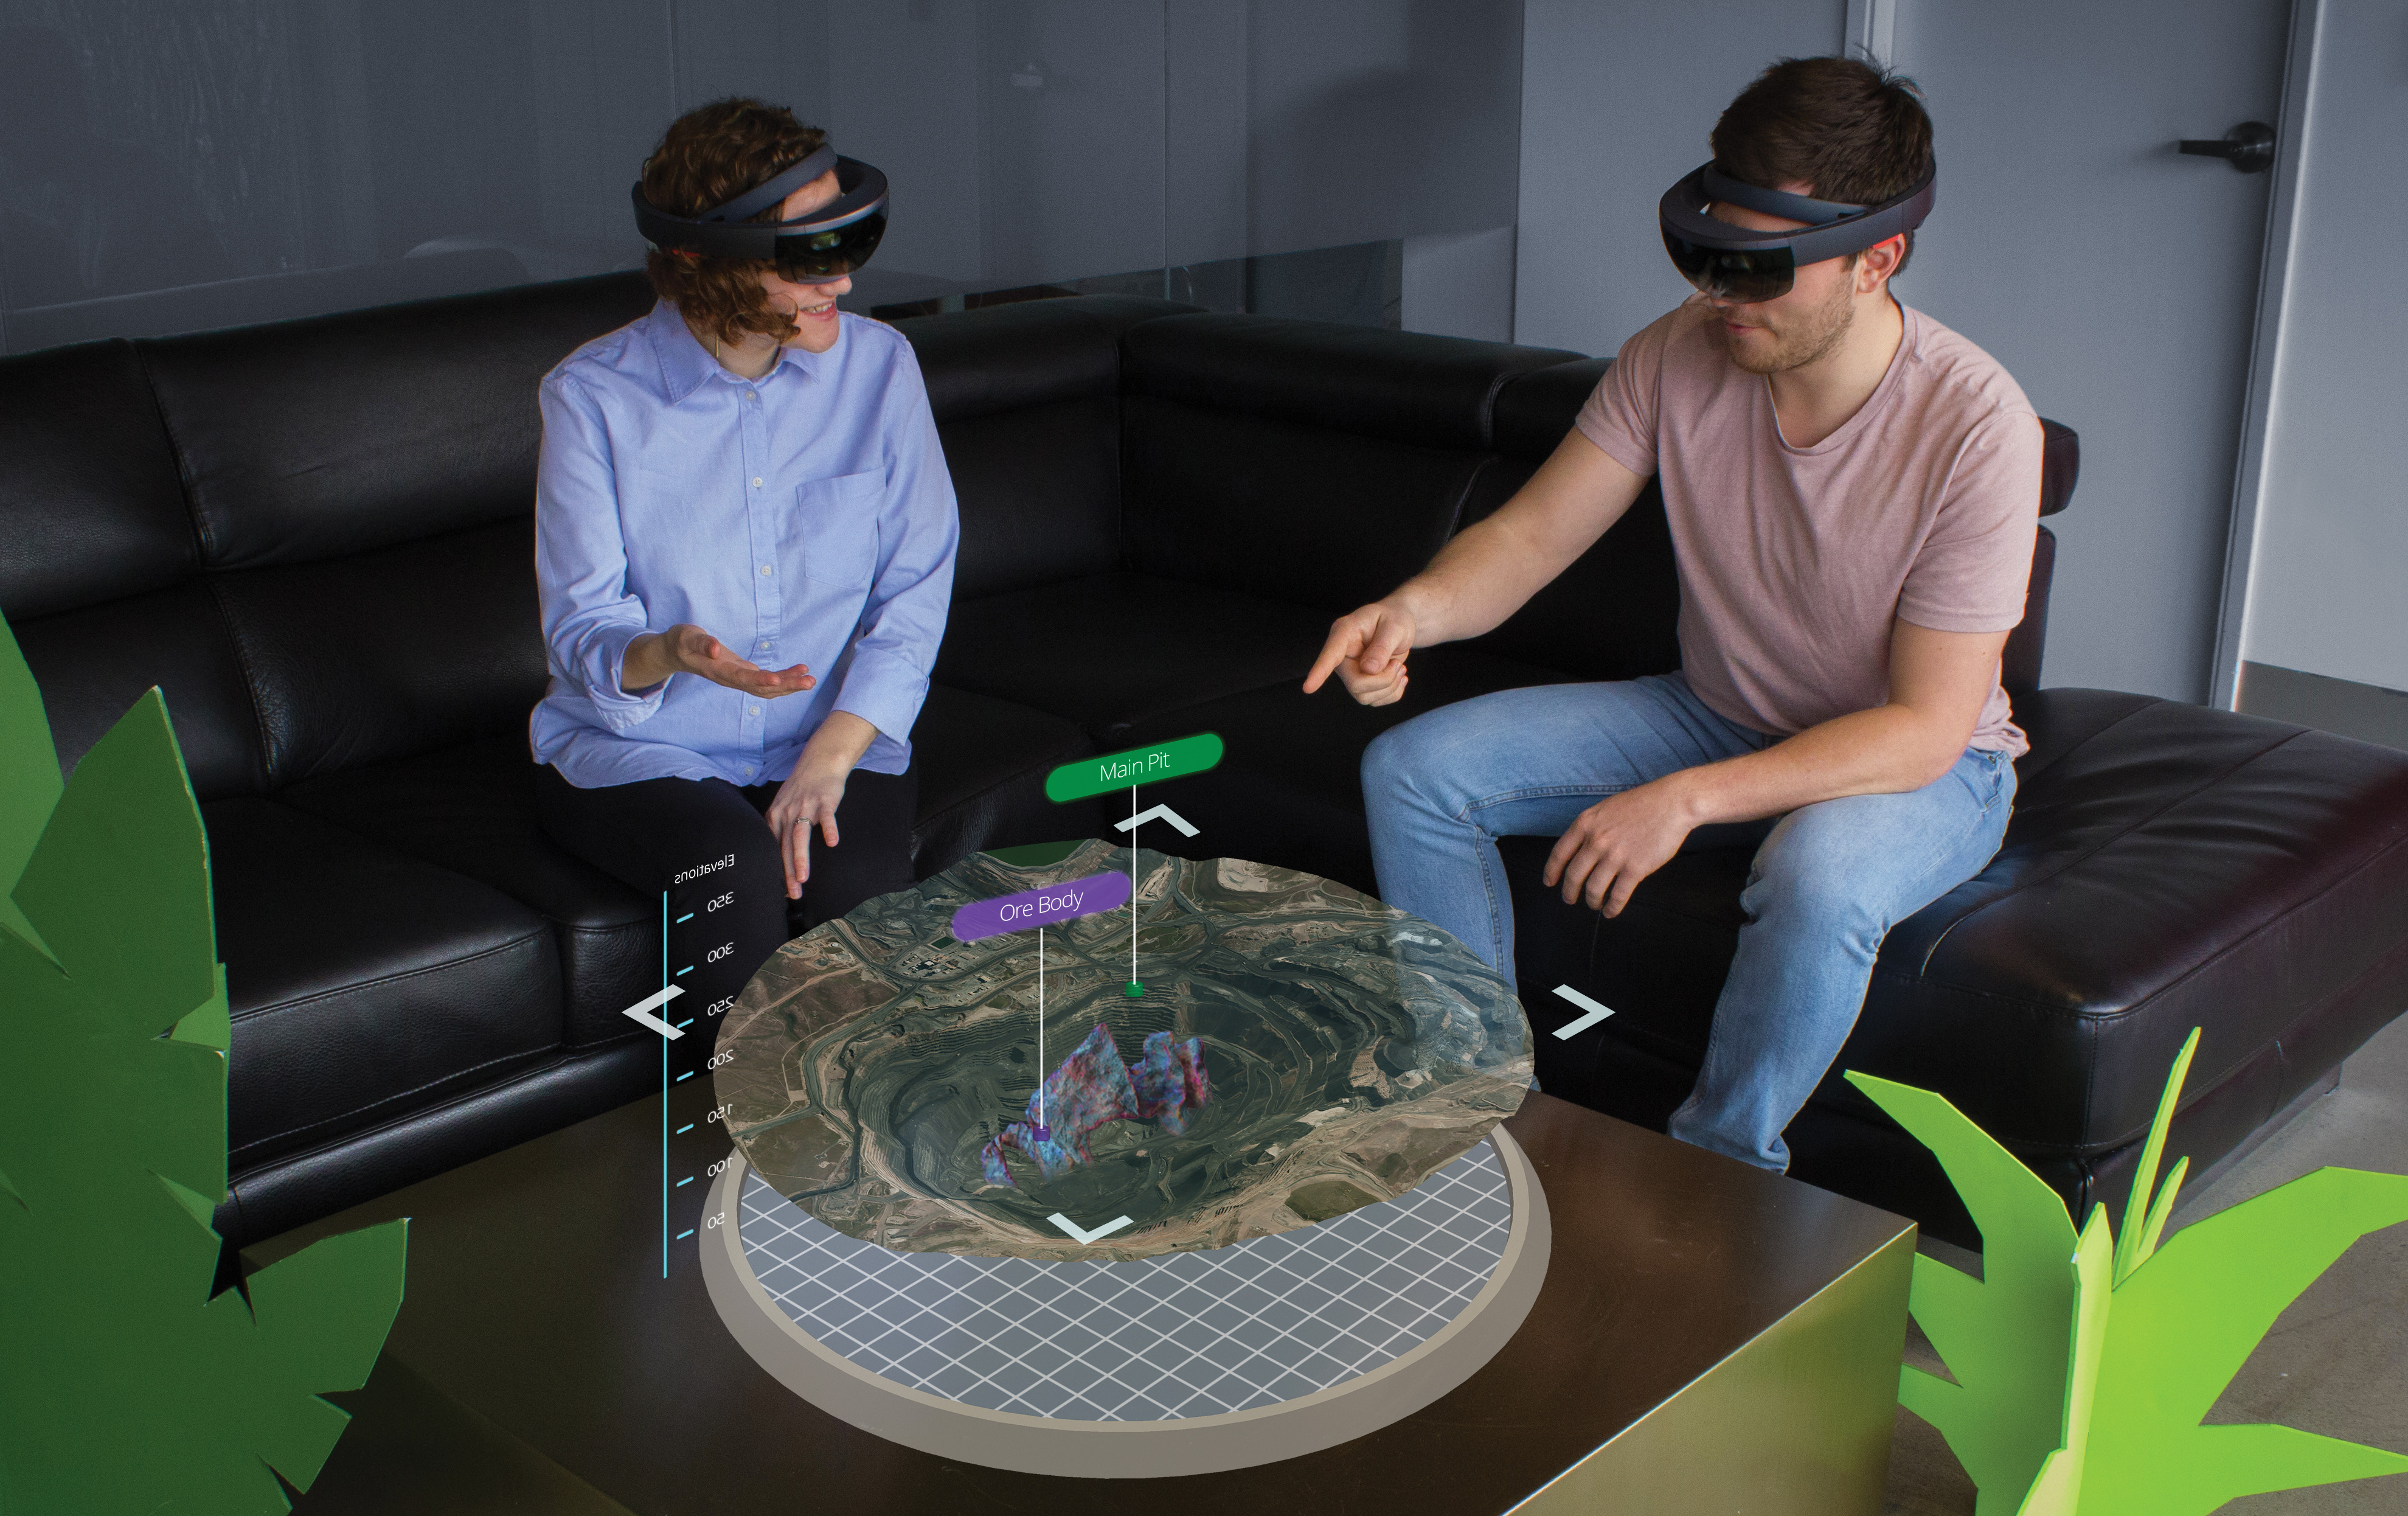 people wearing VR headsets explore a virtual mine